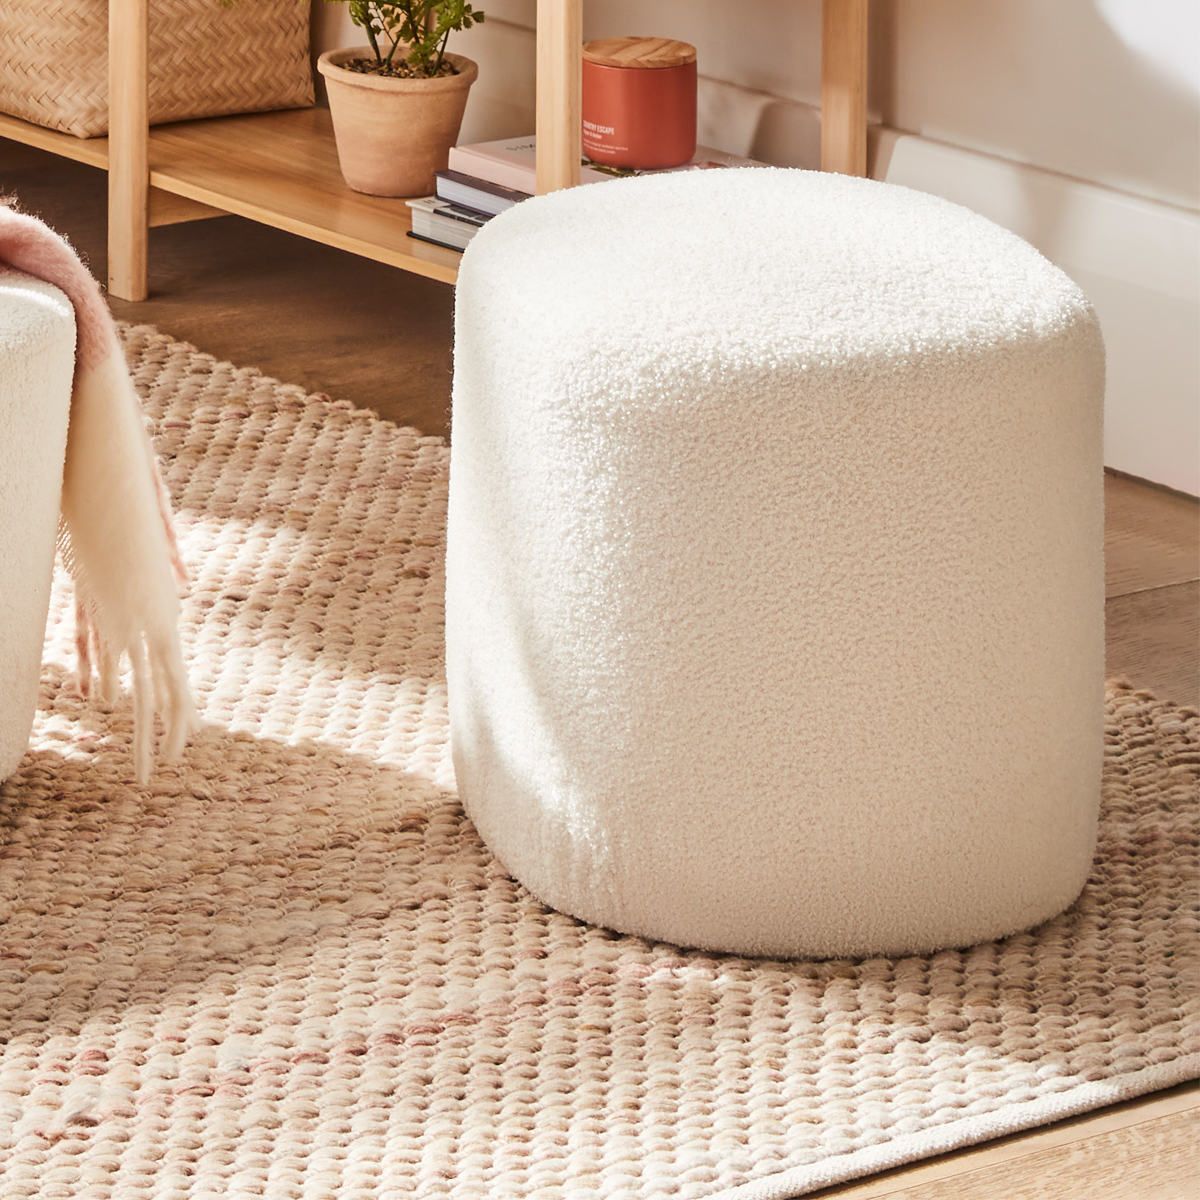 Brand New White Boucle Ottoman New Foot Stool Seat Chaise | Ebay Regarding Boucle Ottomans (View 9 of 15)